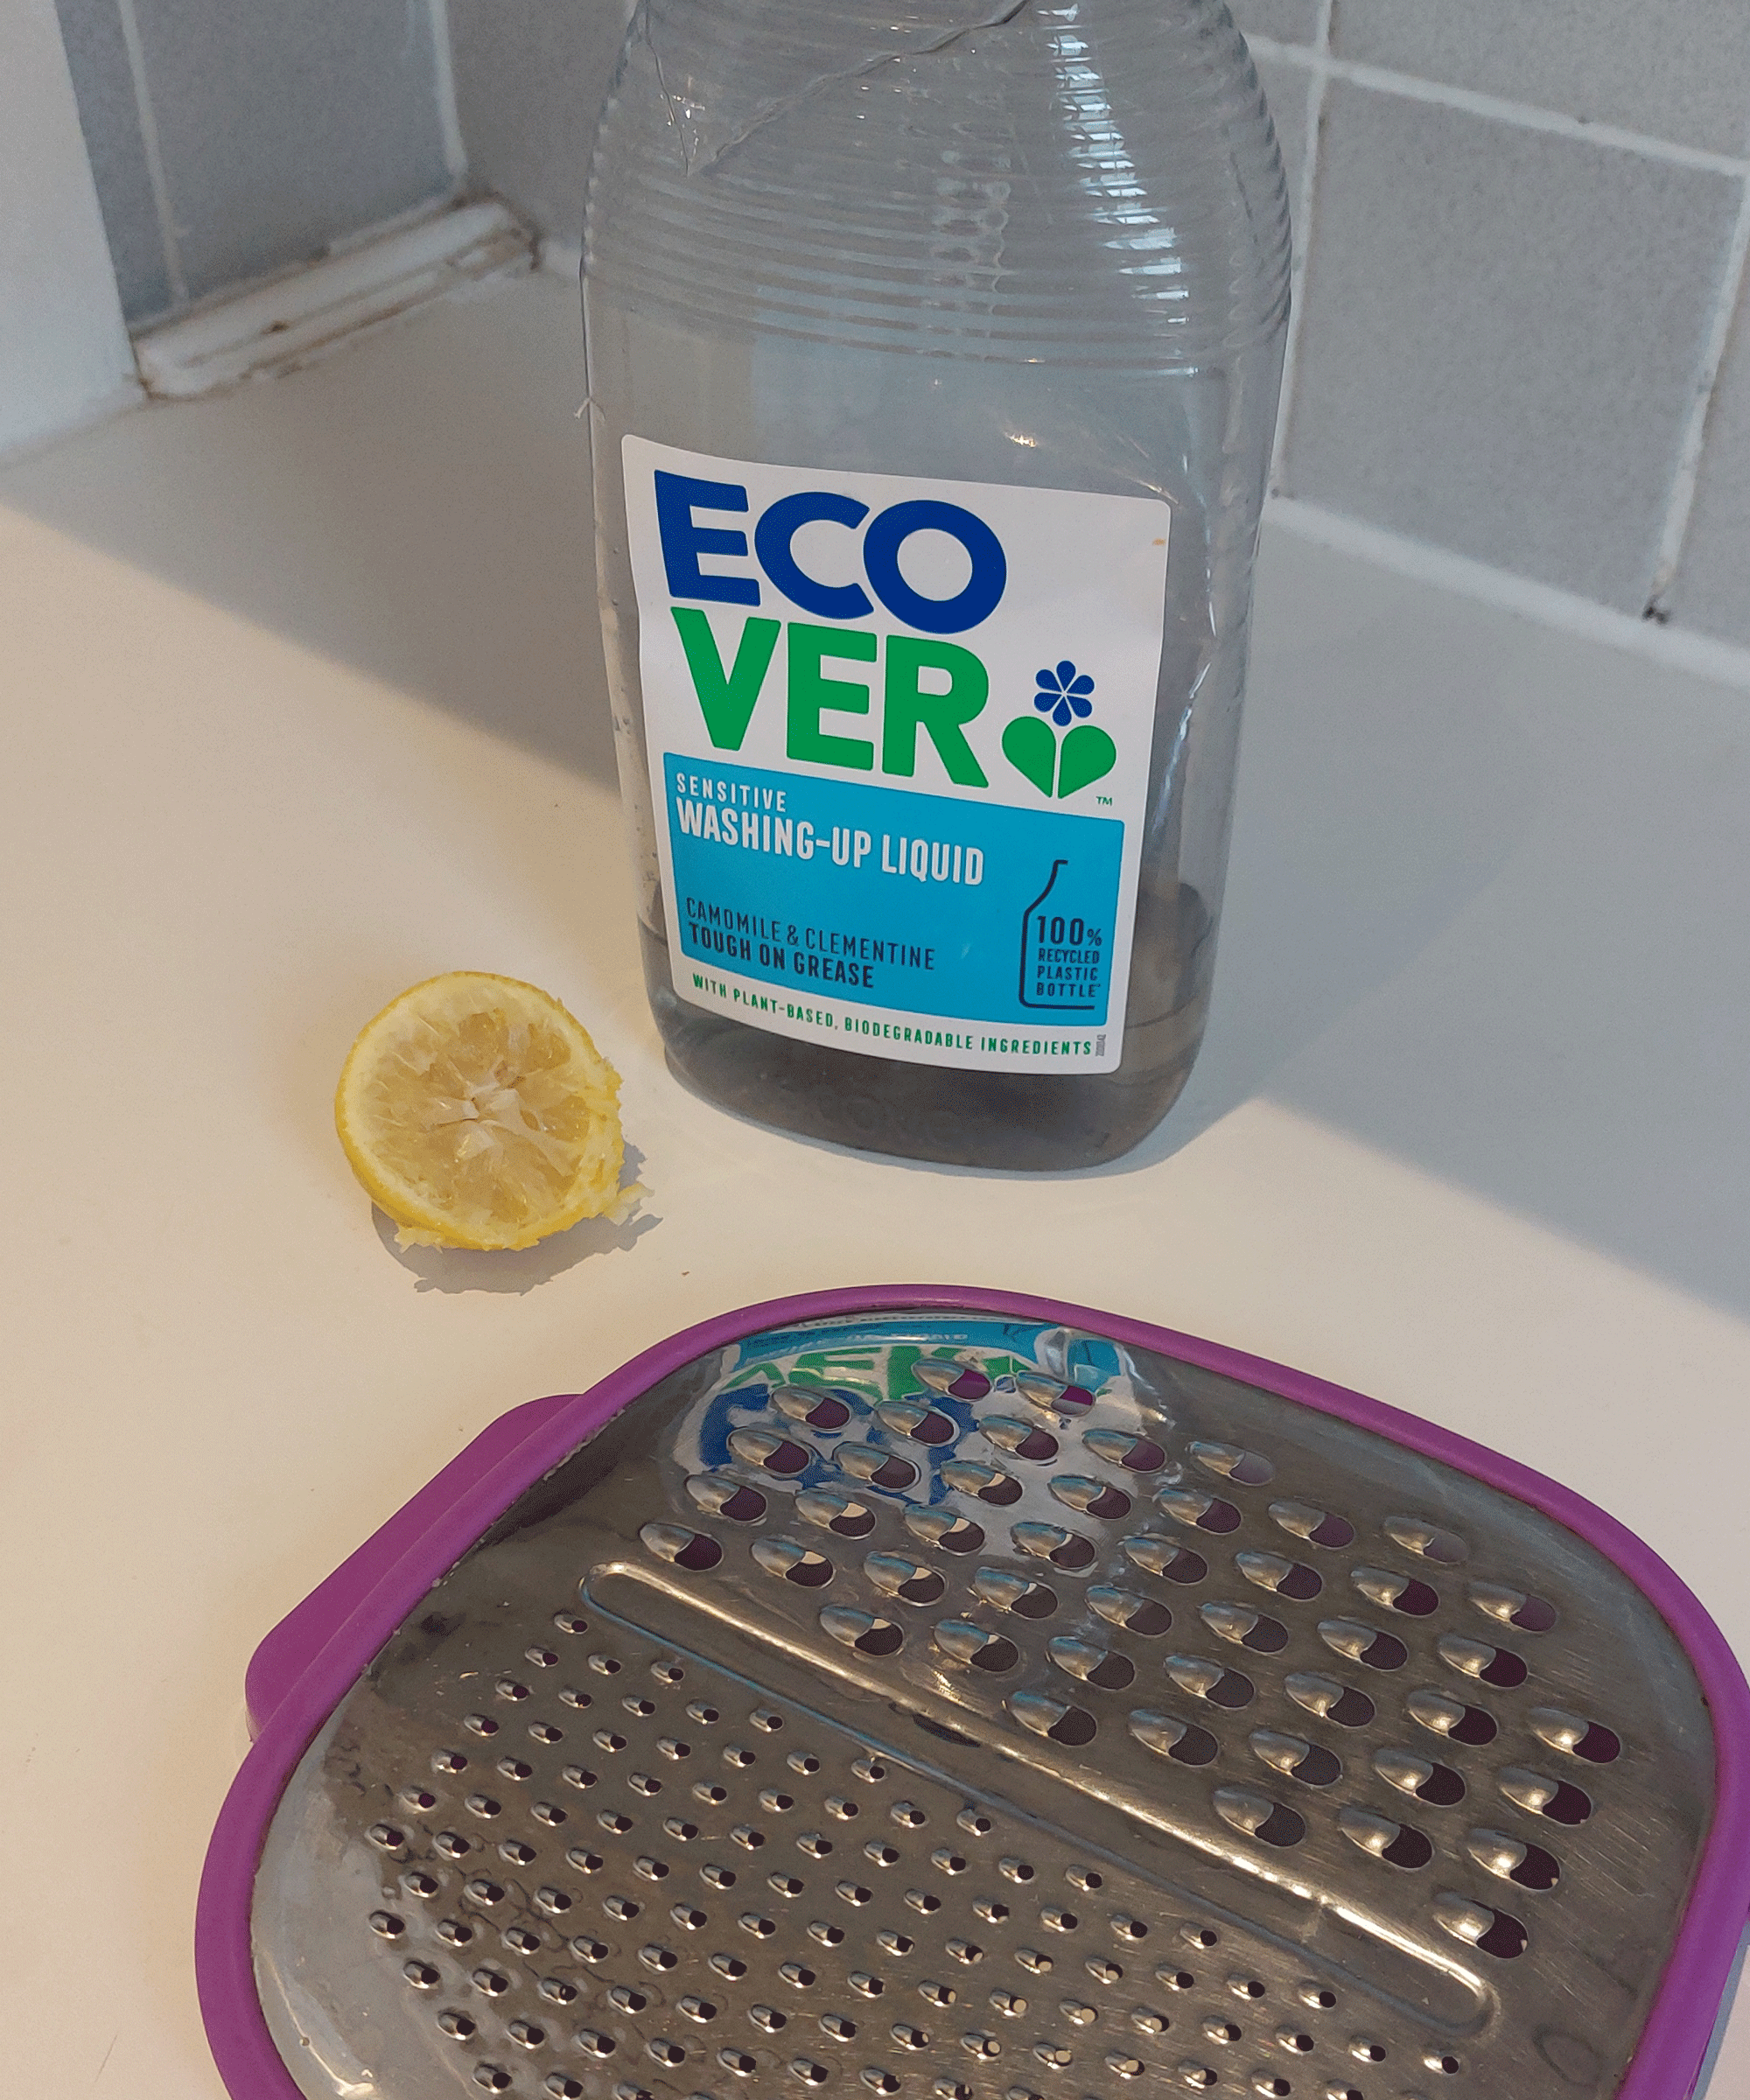 cheese grater, dish soap and a lemon on a kitchen worktop